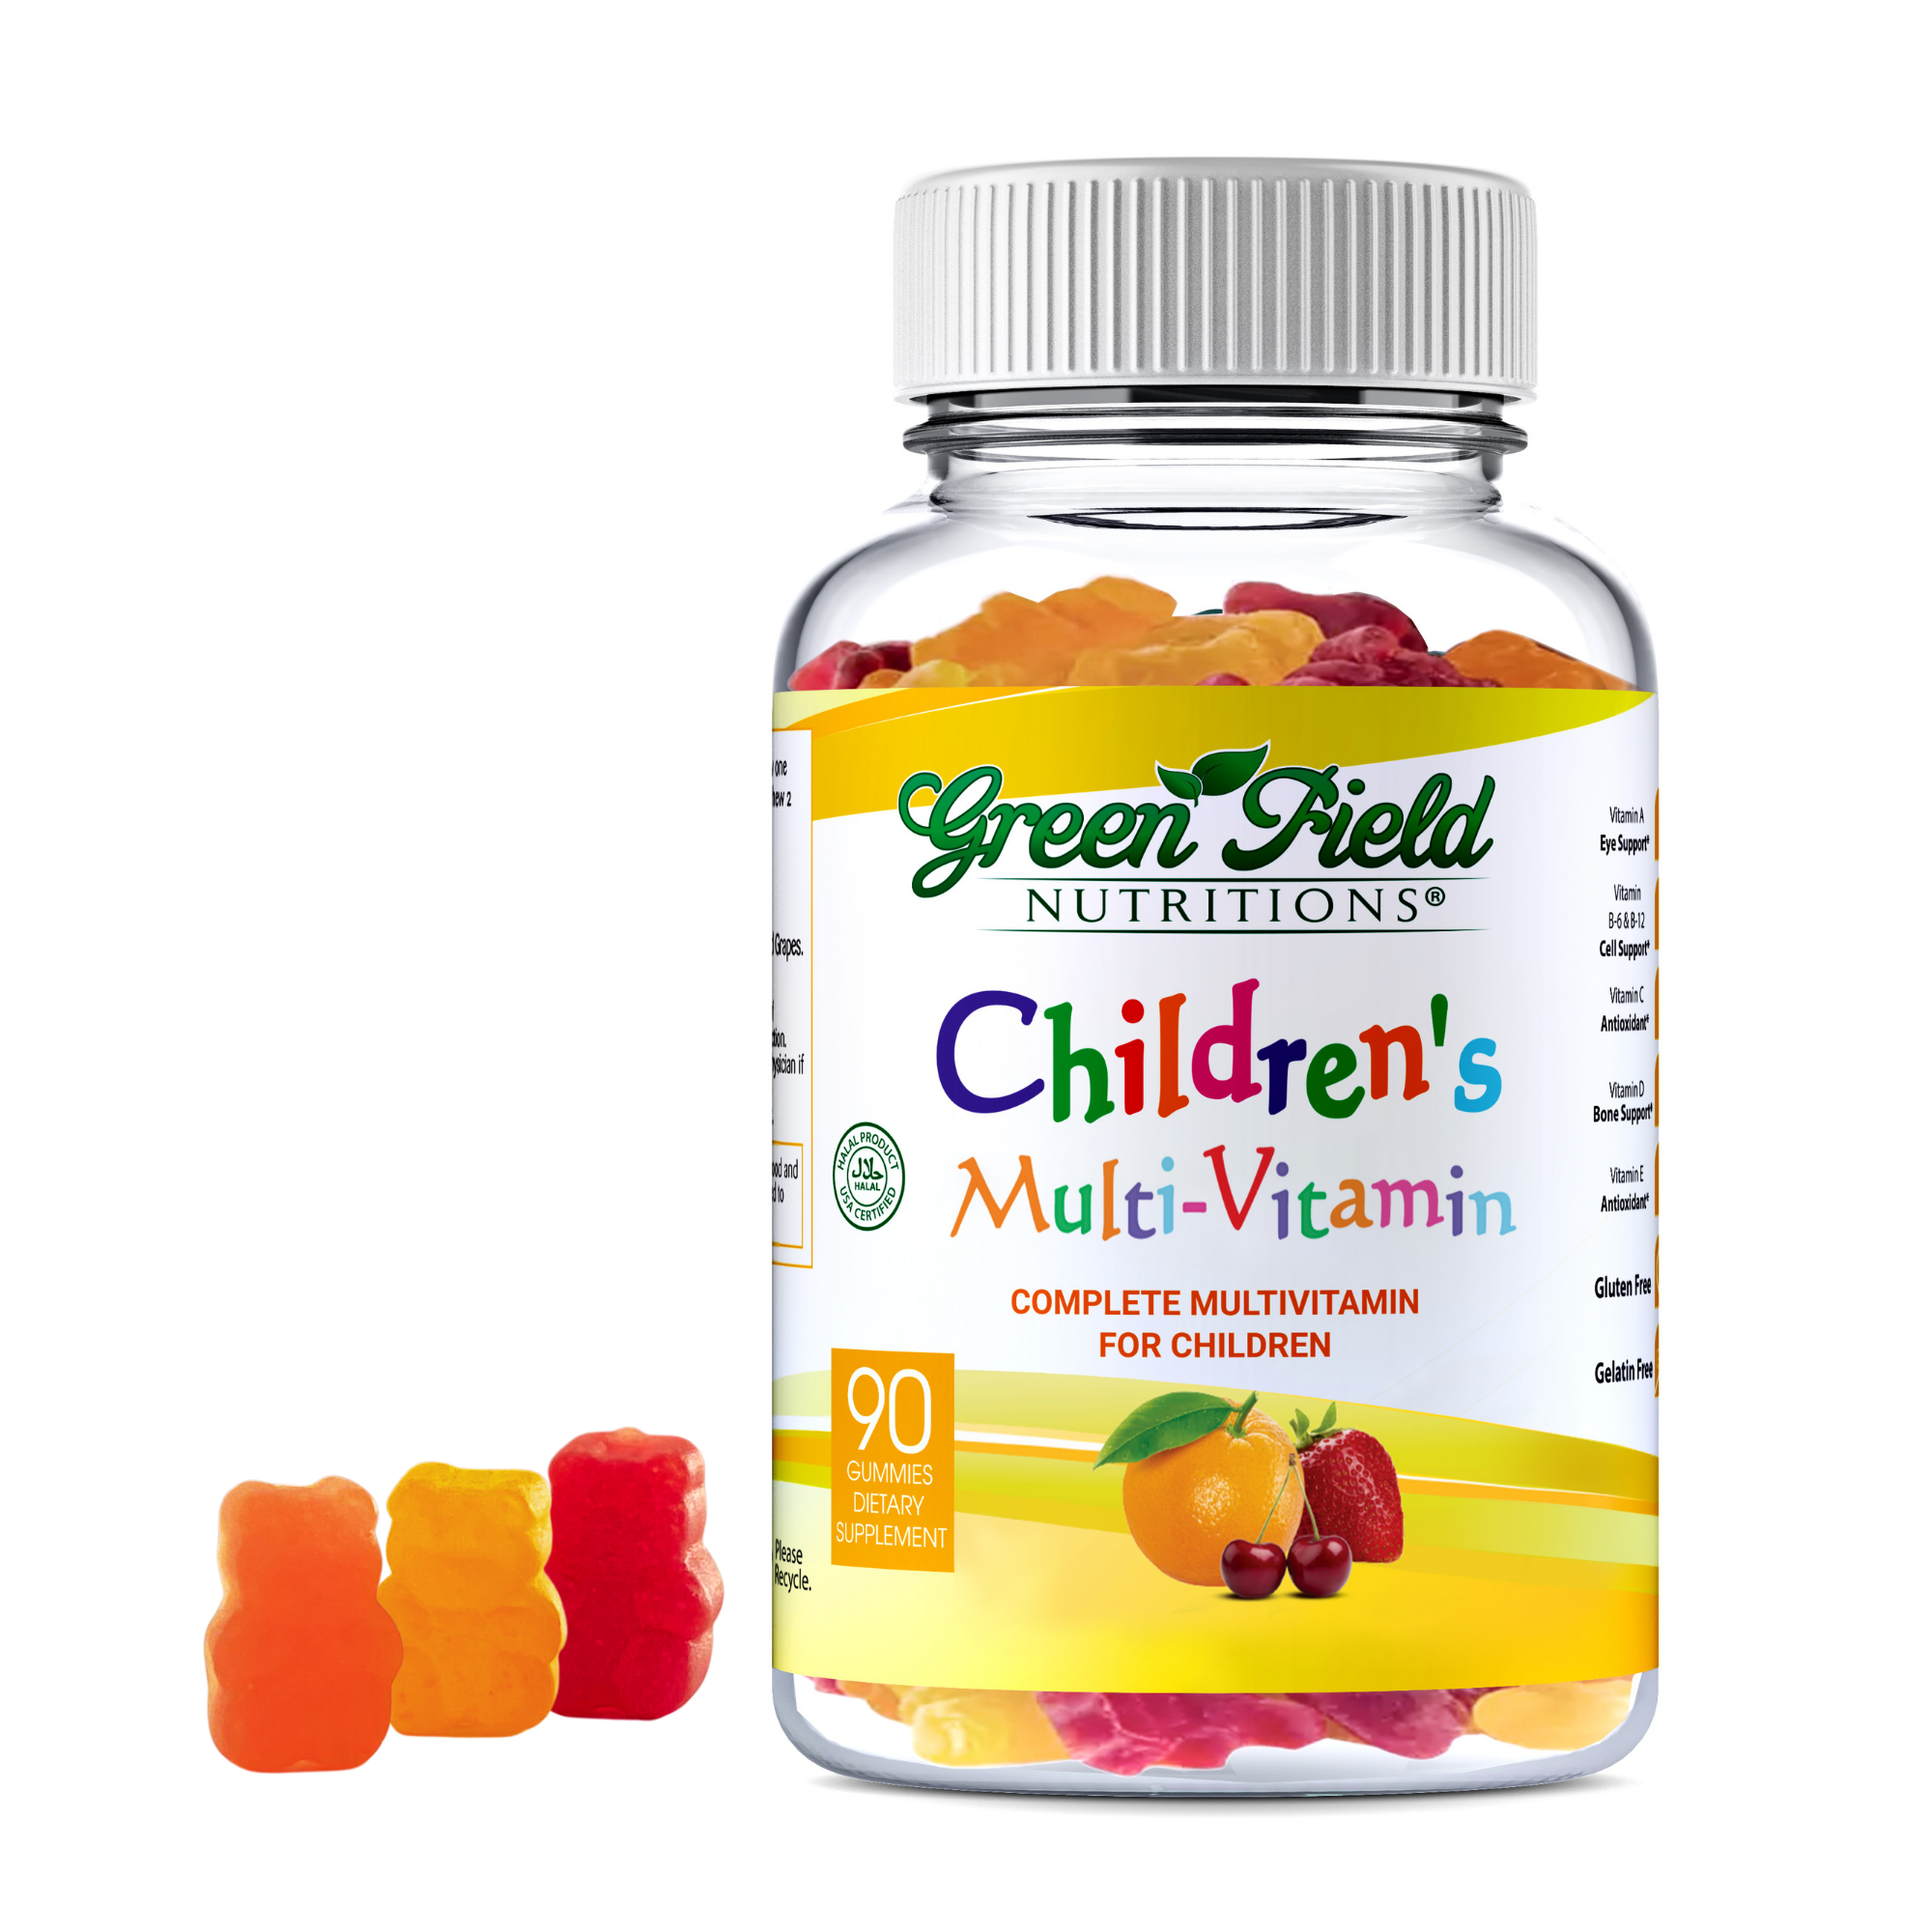 Greenfield Nutritions -Halal Vitamins Gummies for Kids, Contains All Essential  Halal Multivitamin for Children (Bears), Vitamin C, D3, and Zinc for Immunity, B6 & Methyl B12 for Energy- Gelatin Free and Gluten Free-90 Gummies